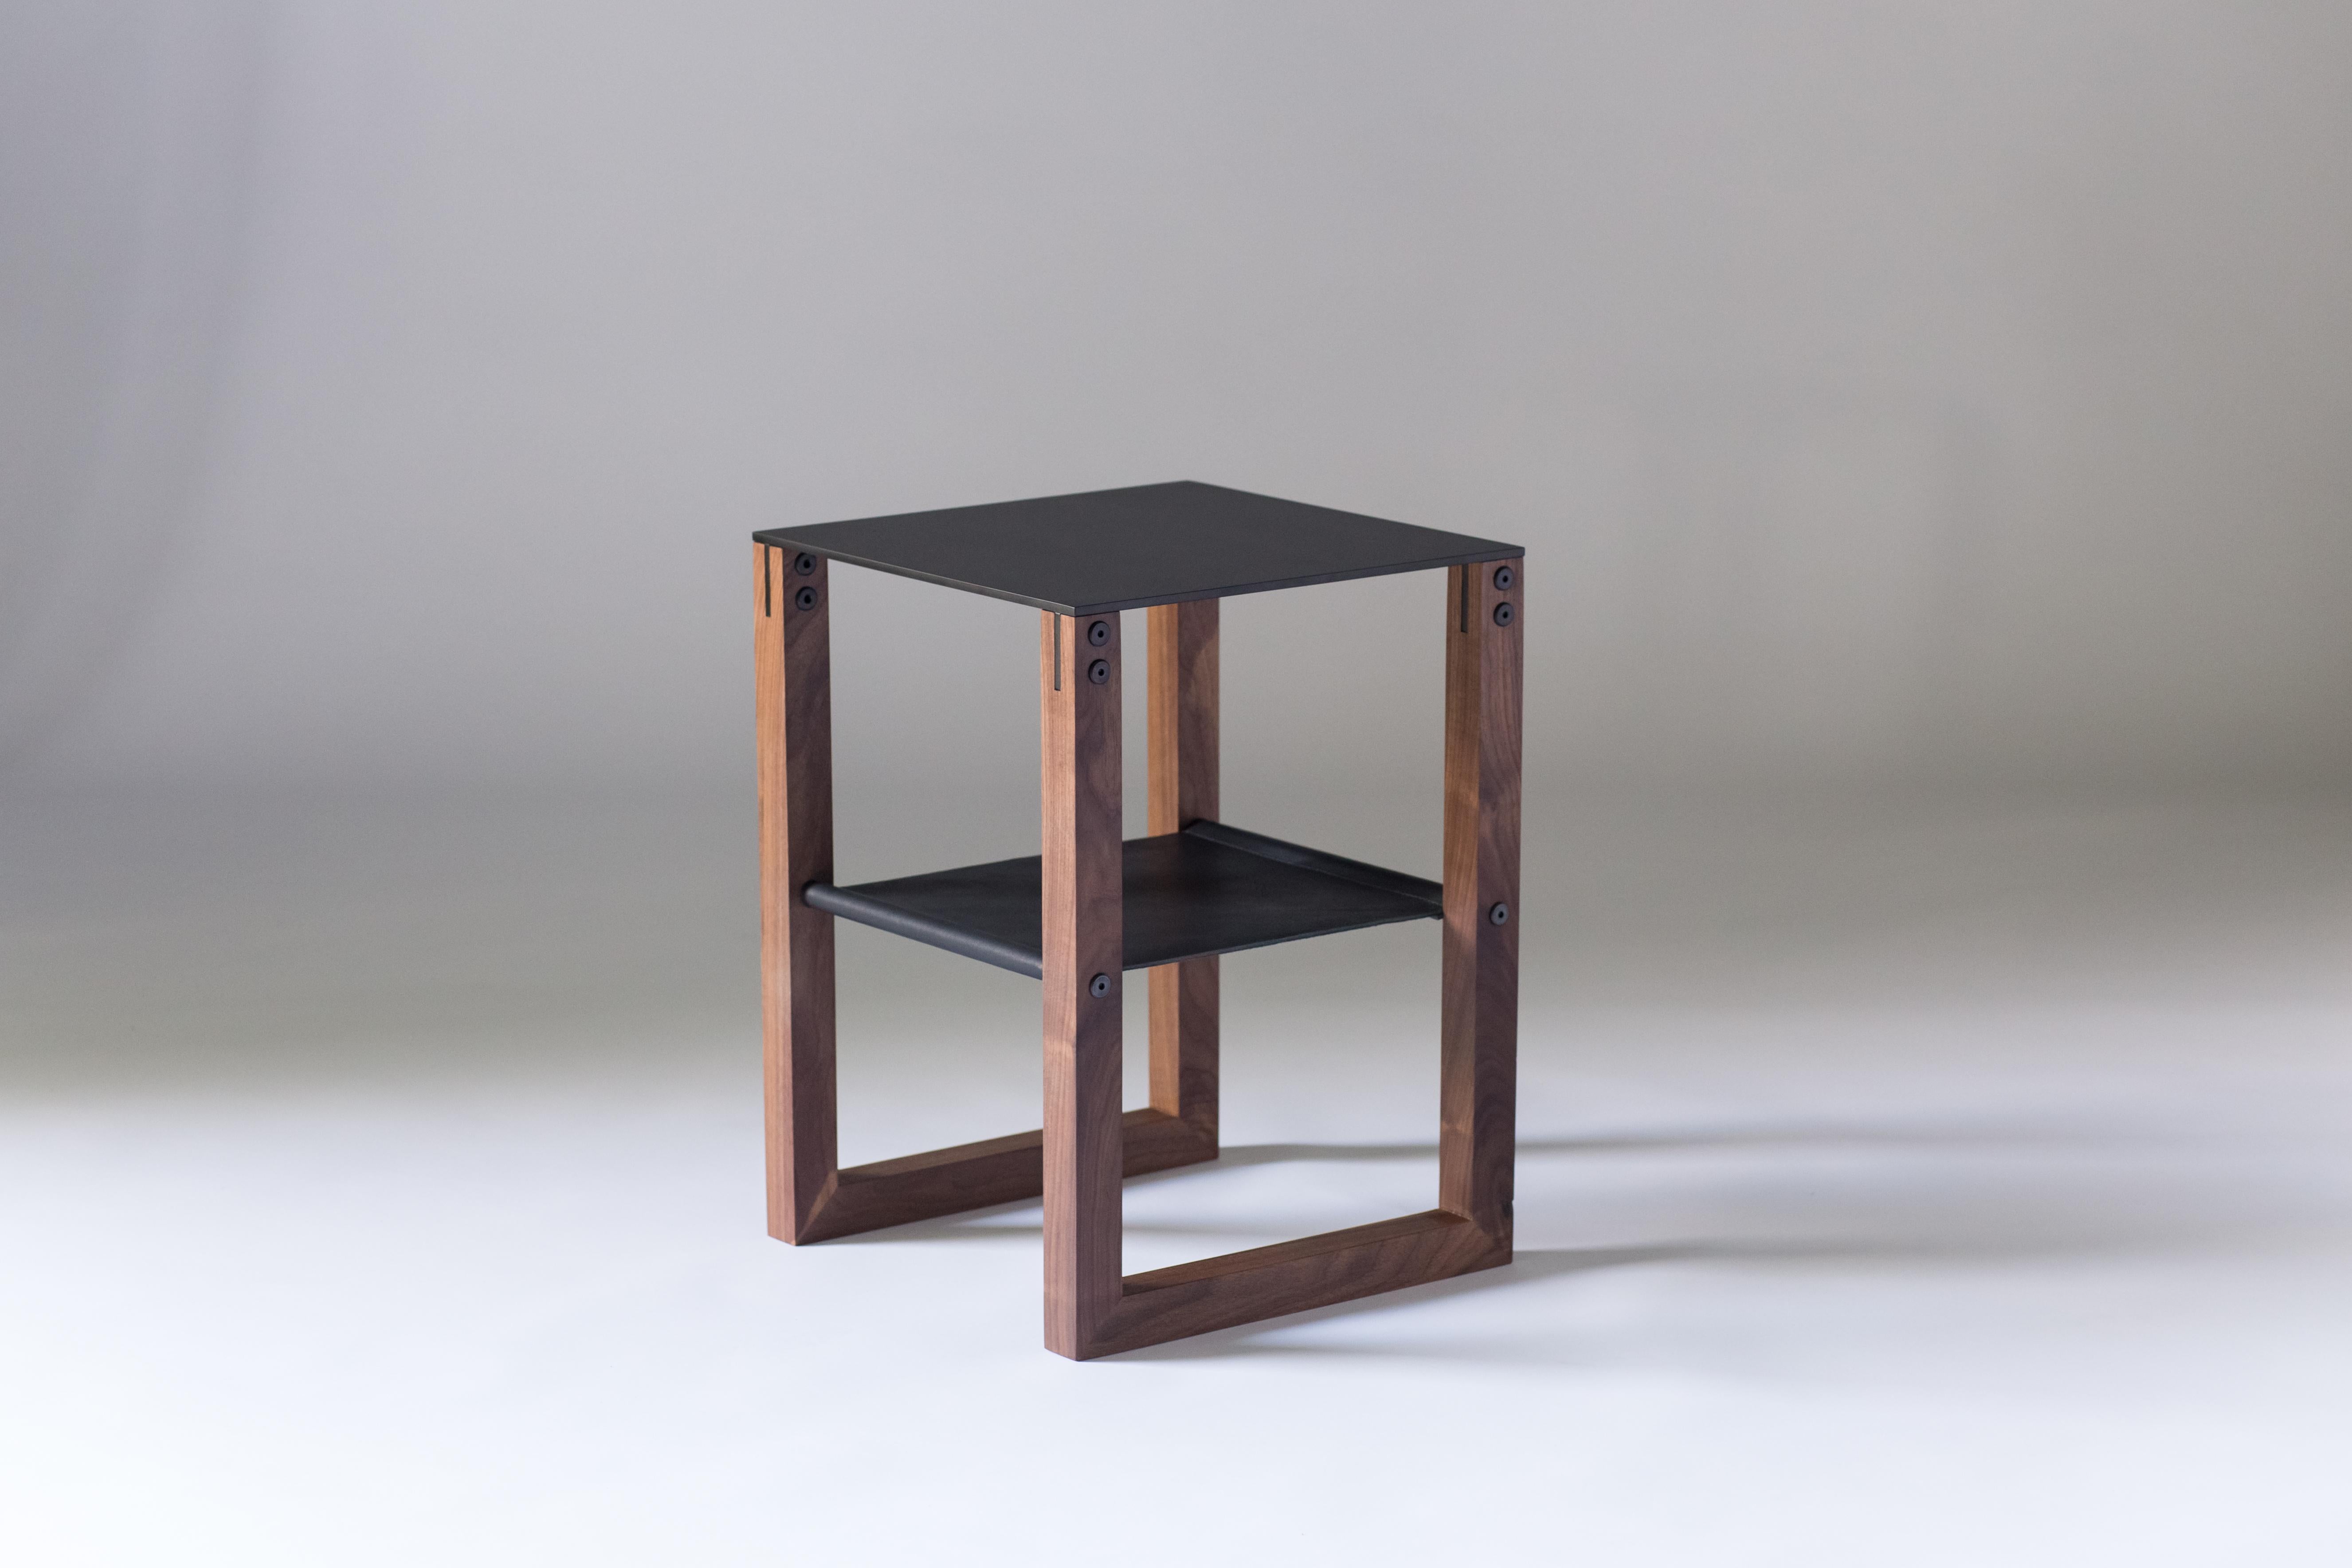 The Sling - Modern Aluminum, Leather and Walnut Side Table

 Minimal and elegant form paired with a balanced and thoughtful design. The Sling side table features powder-coated aluminum, blackened hand-stitched leather, and hand finished walnut.